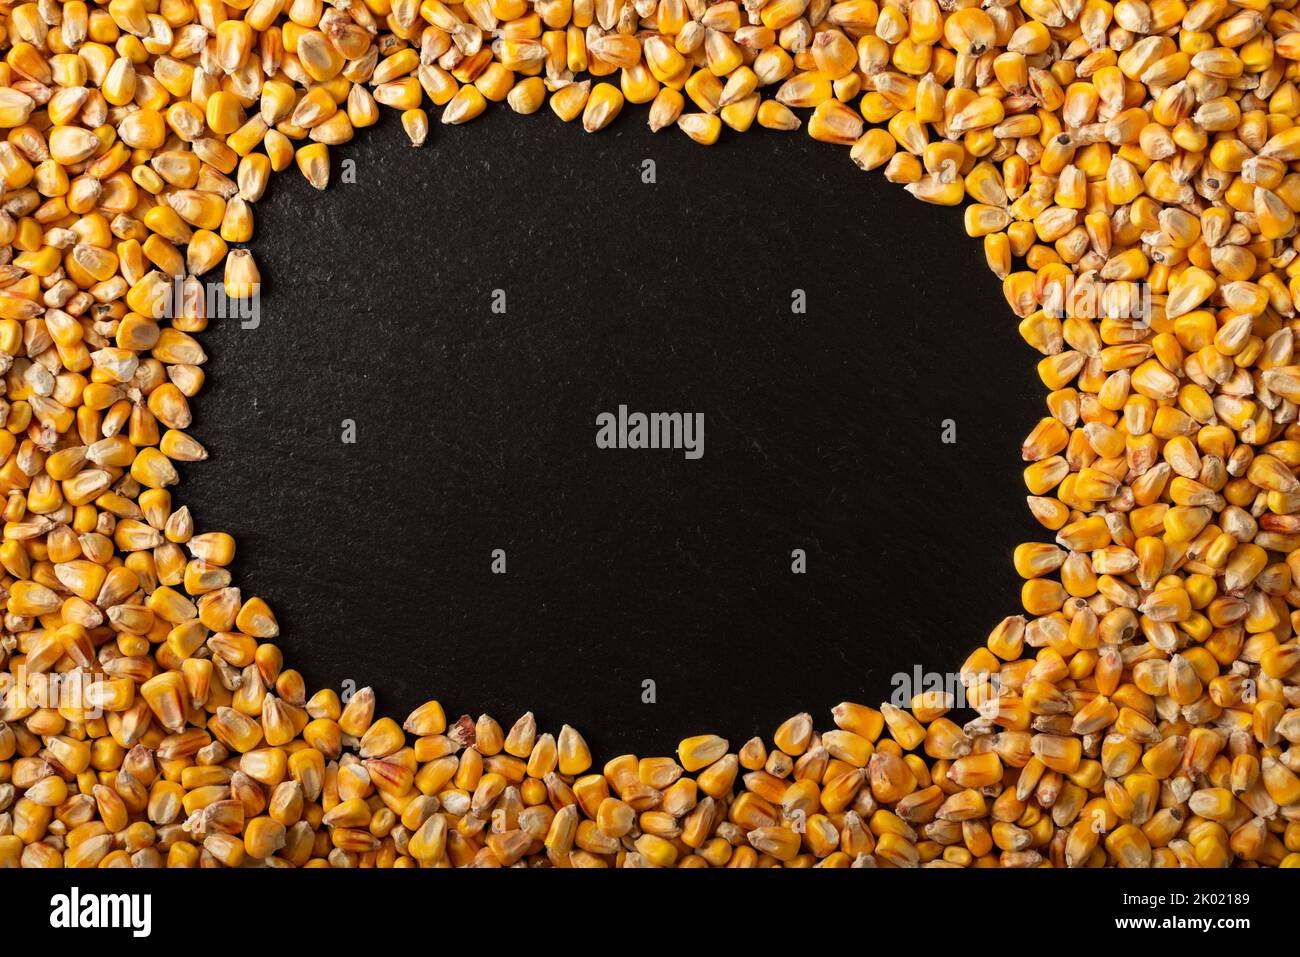 Maize corn background with copy-space flat lay Stock Photo